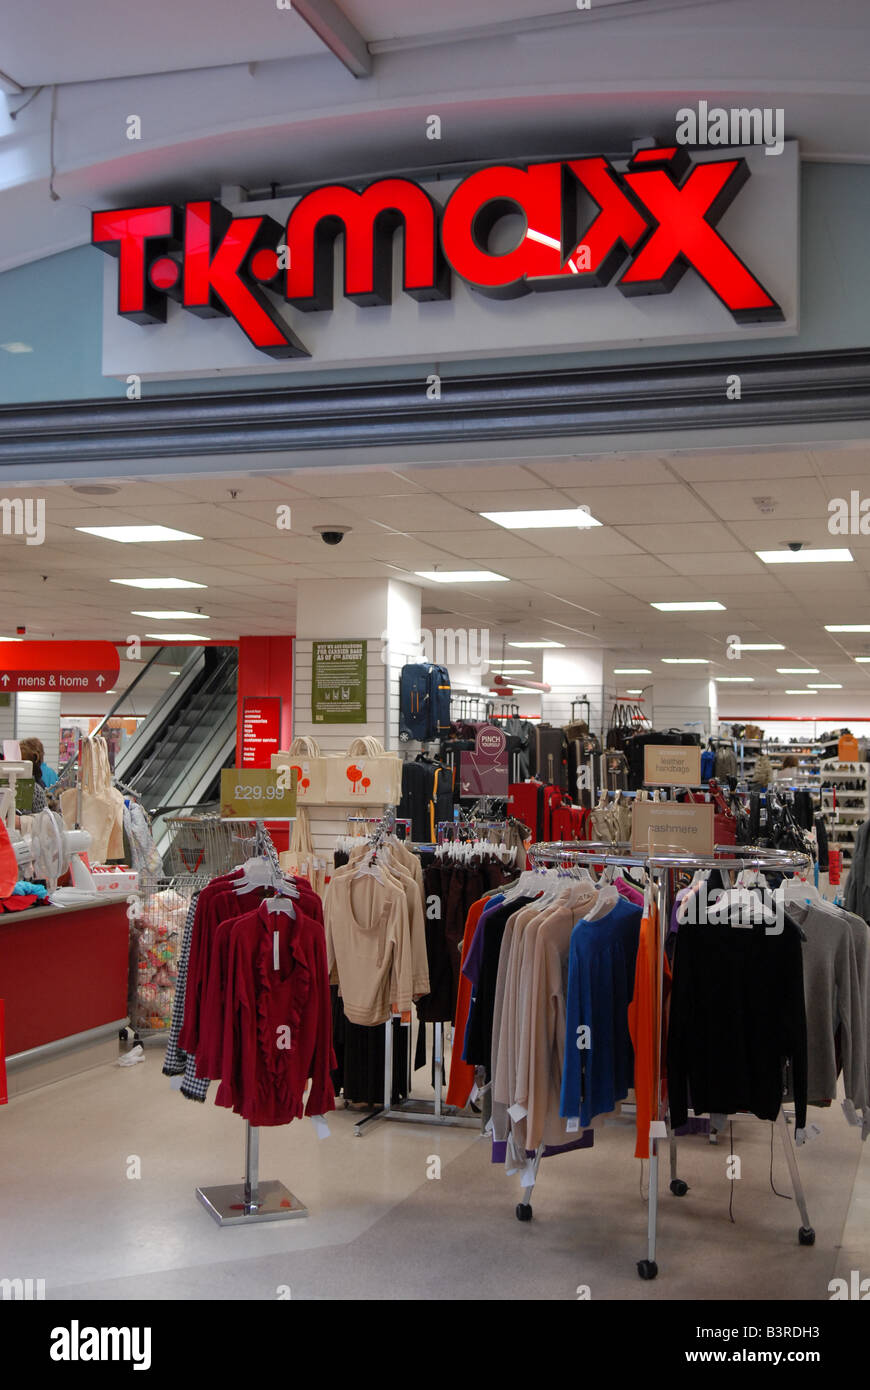 stroomkring staal Maak plaats T K Maxx shop Stock Photo - Alamy